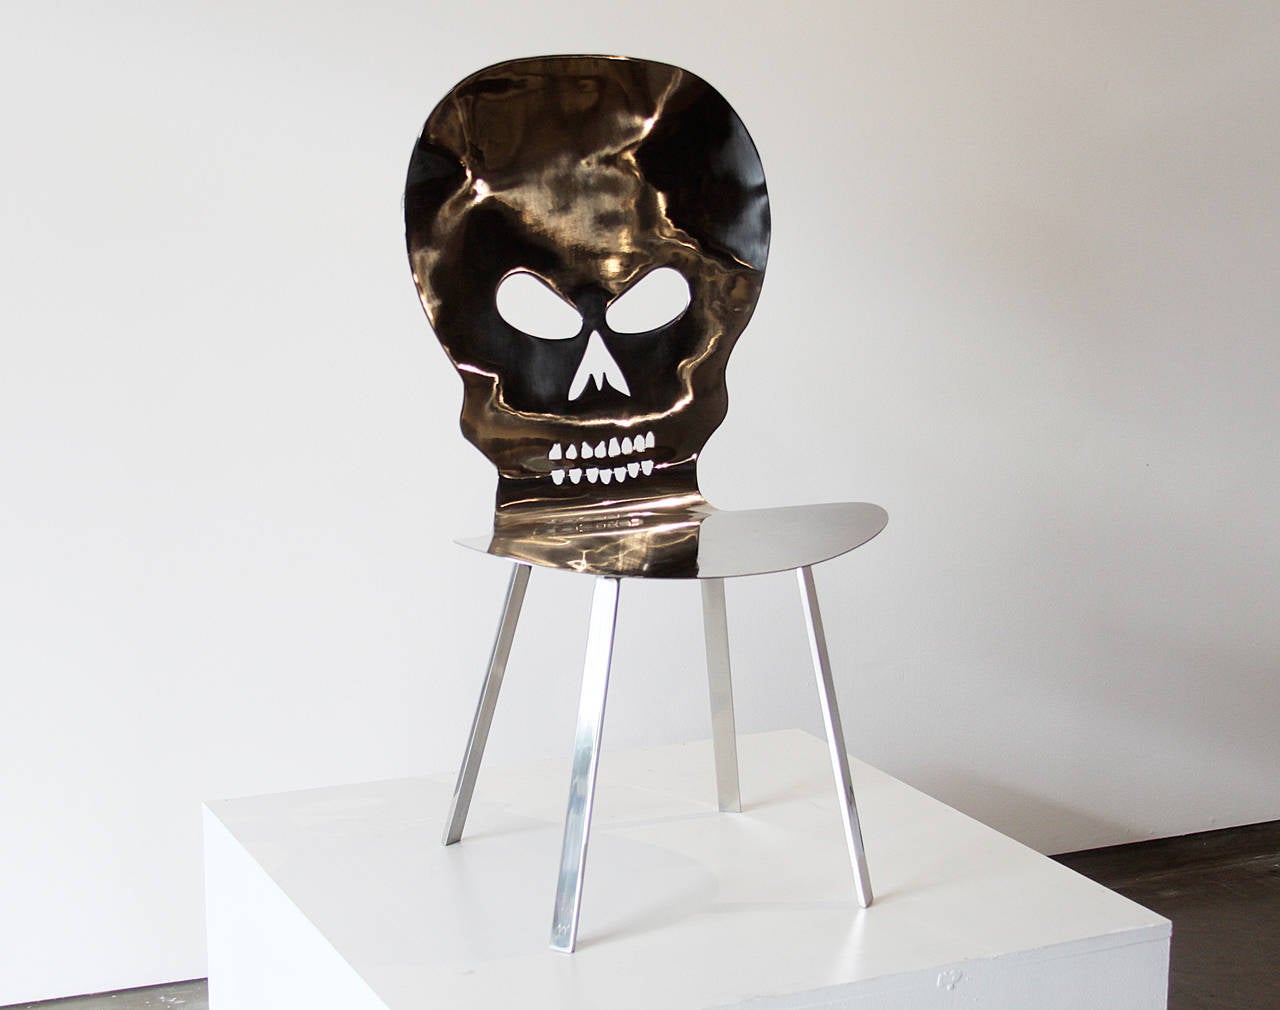 A uniquely designed chair/sculpture by Brazilian designer Alê Jordão. The chair is made of stainless steel. The seat back has a skulls face with and has been hammered. The concept of this piece is 